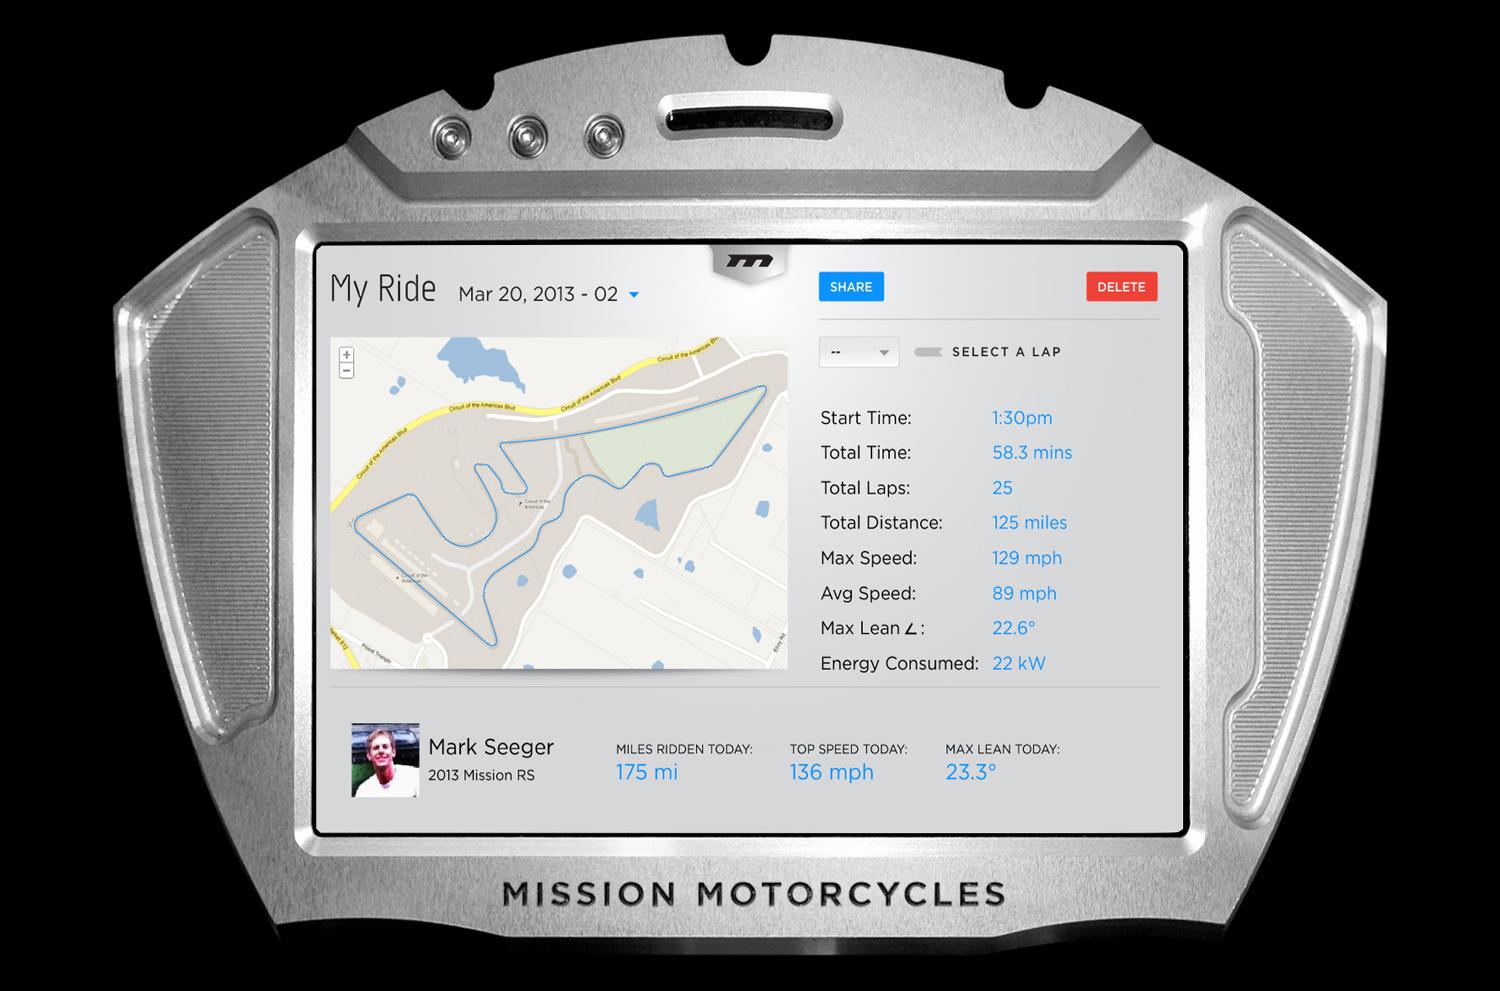 missions hot new 160hp electric motorcycles one gear plus reverse 150mph and no shifting mission moto r ride tracker screen